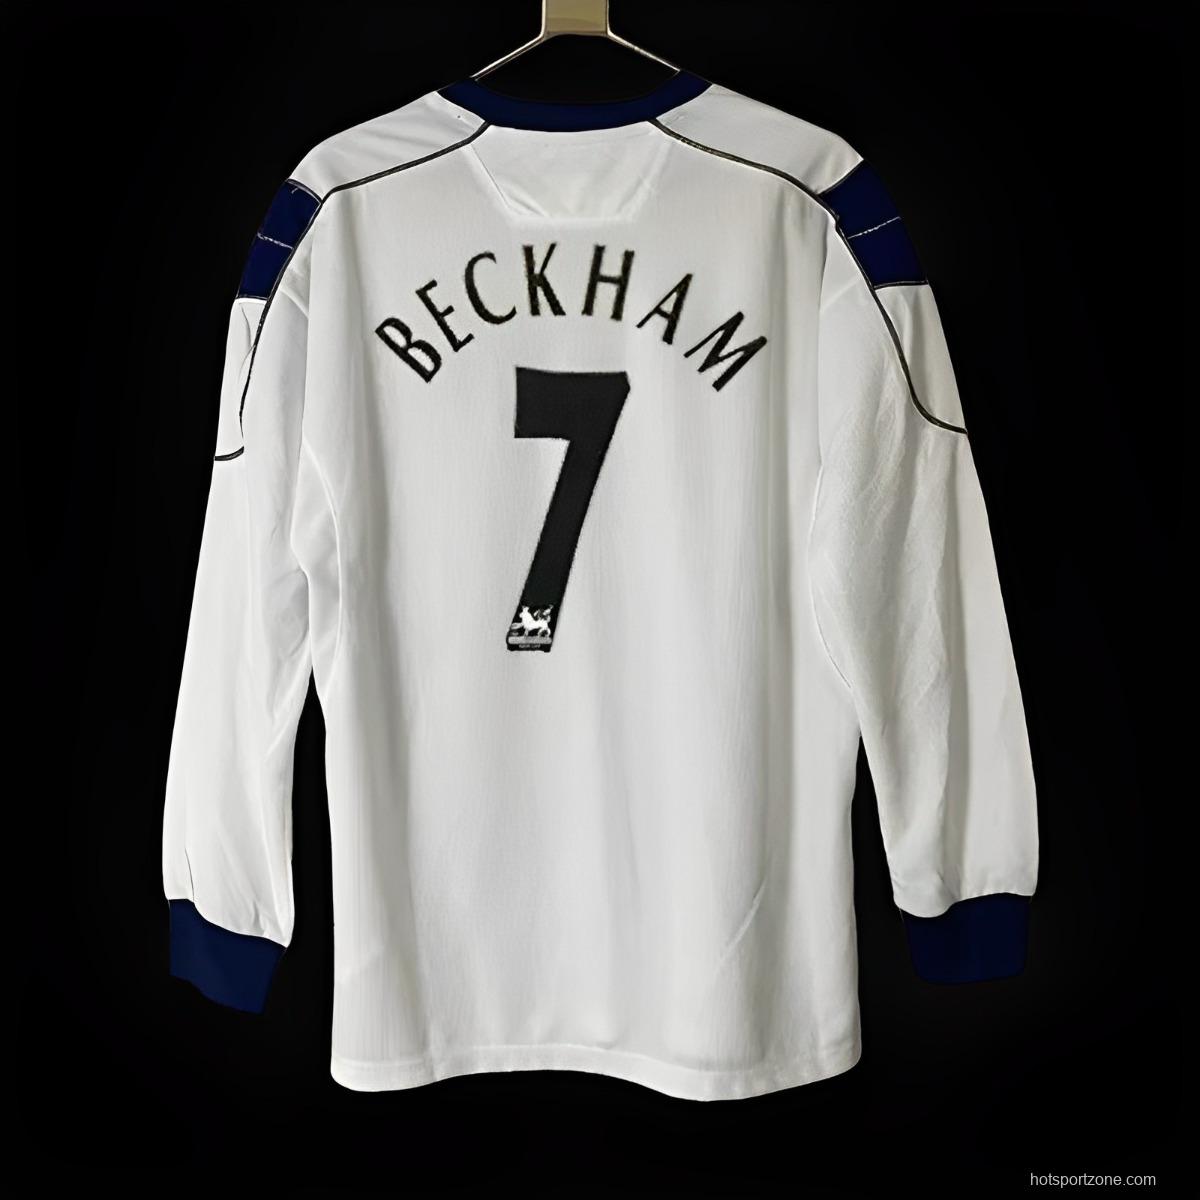 Retro 00/1 Manchester United Away Long Sleeve White Jersey